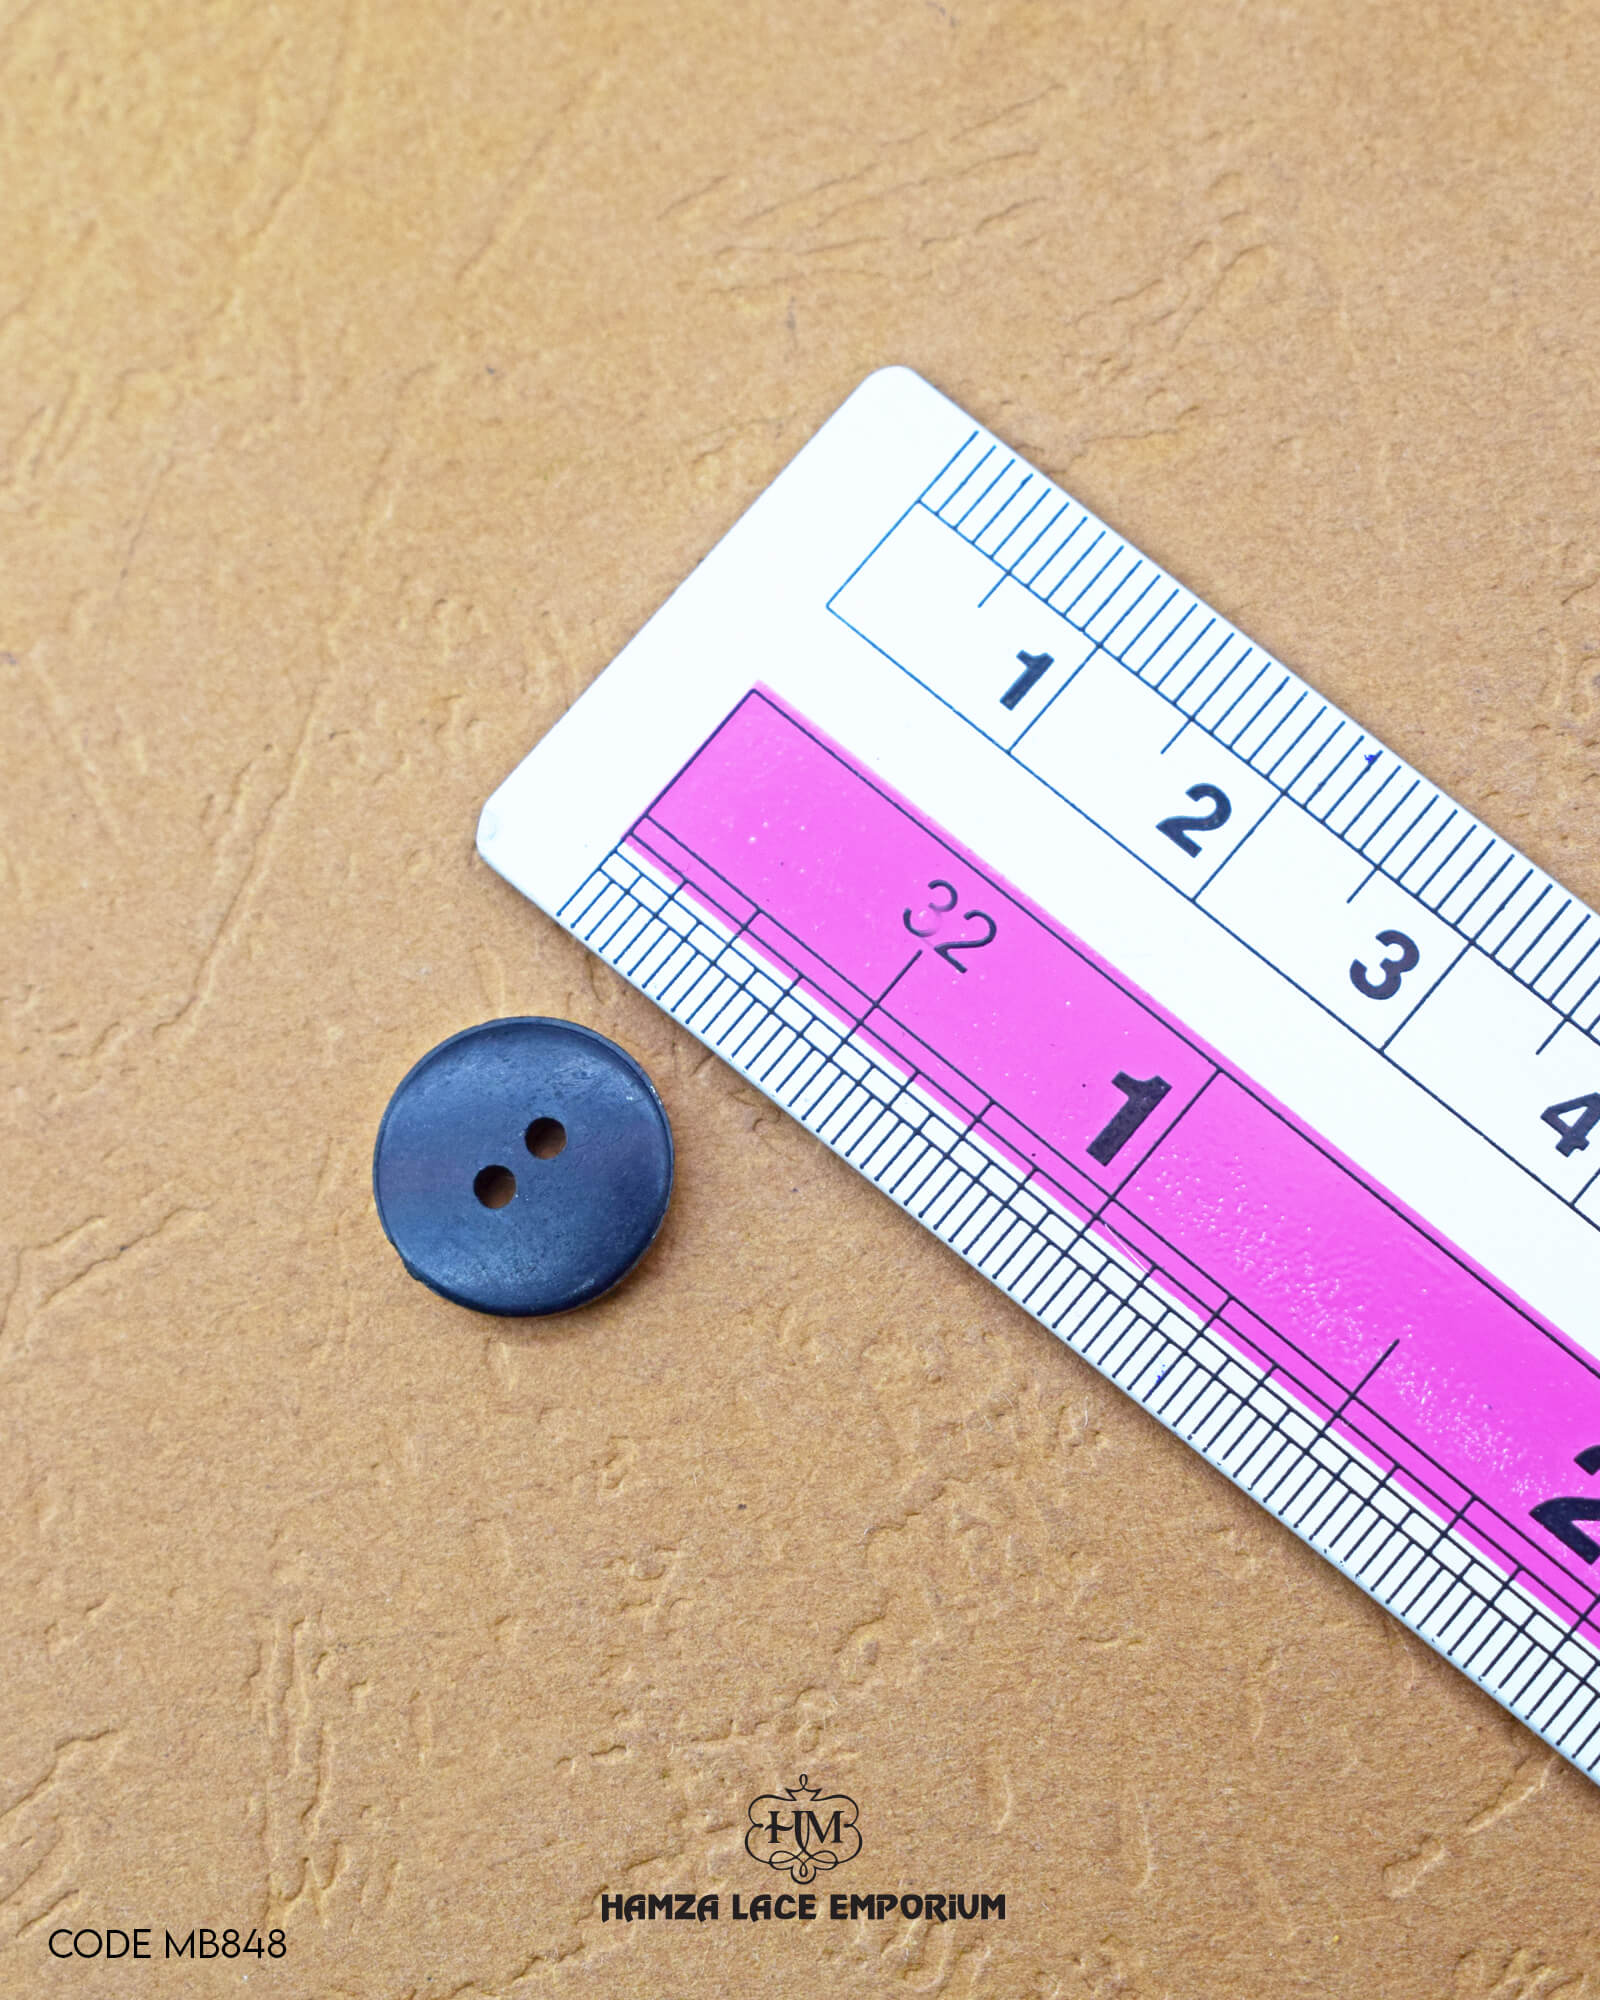 The dimensions of the 'Flower Design Button MB848' are determined using a ruler.